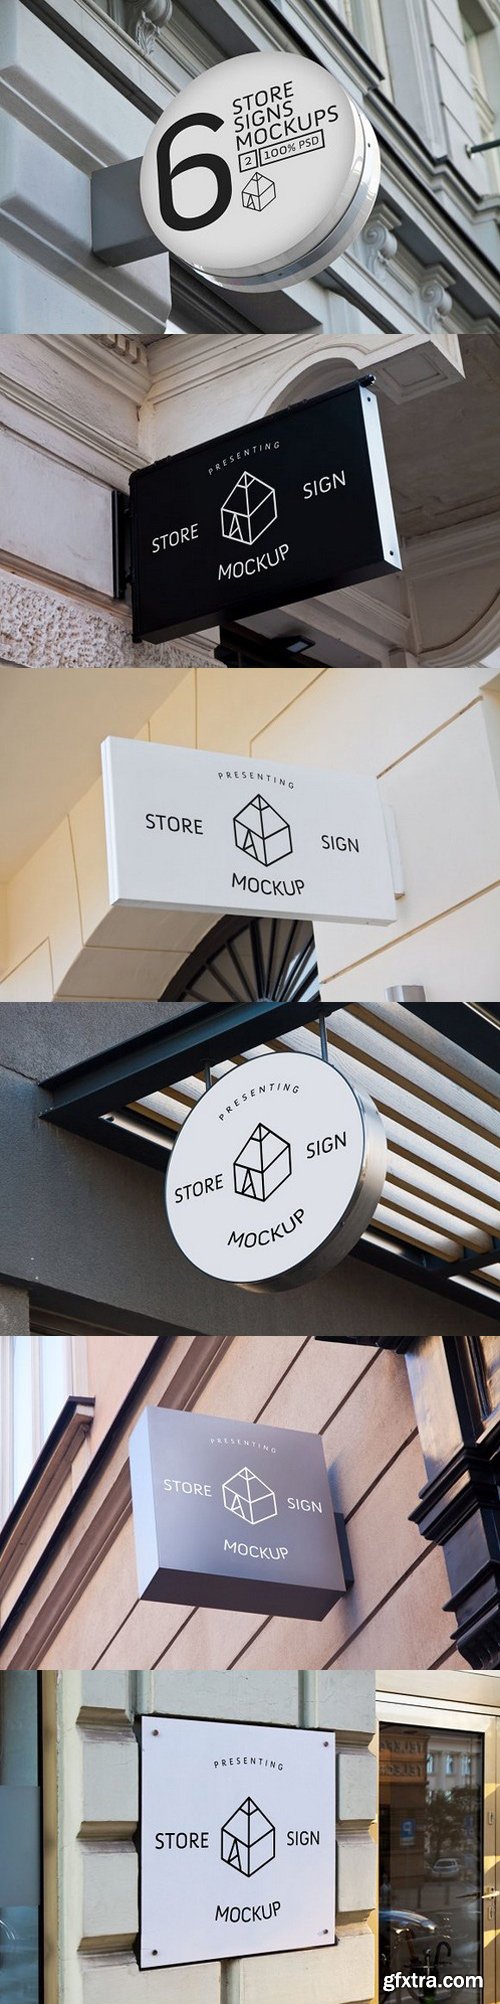 CM - Store Signs Mock-ups 2 685102